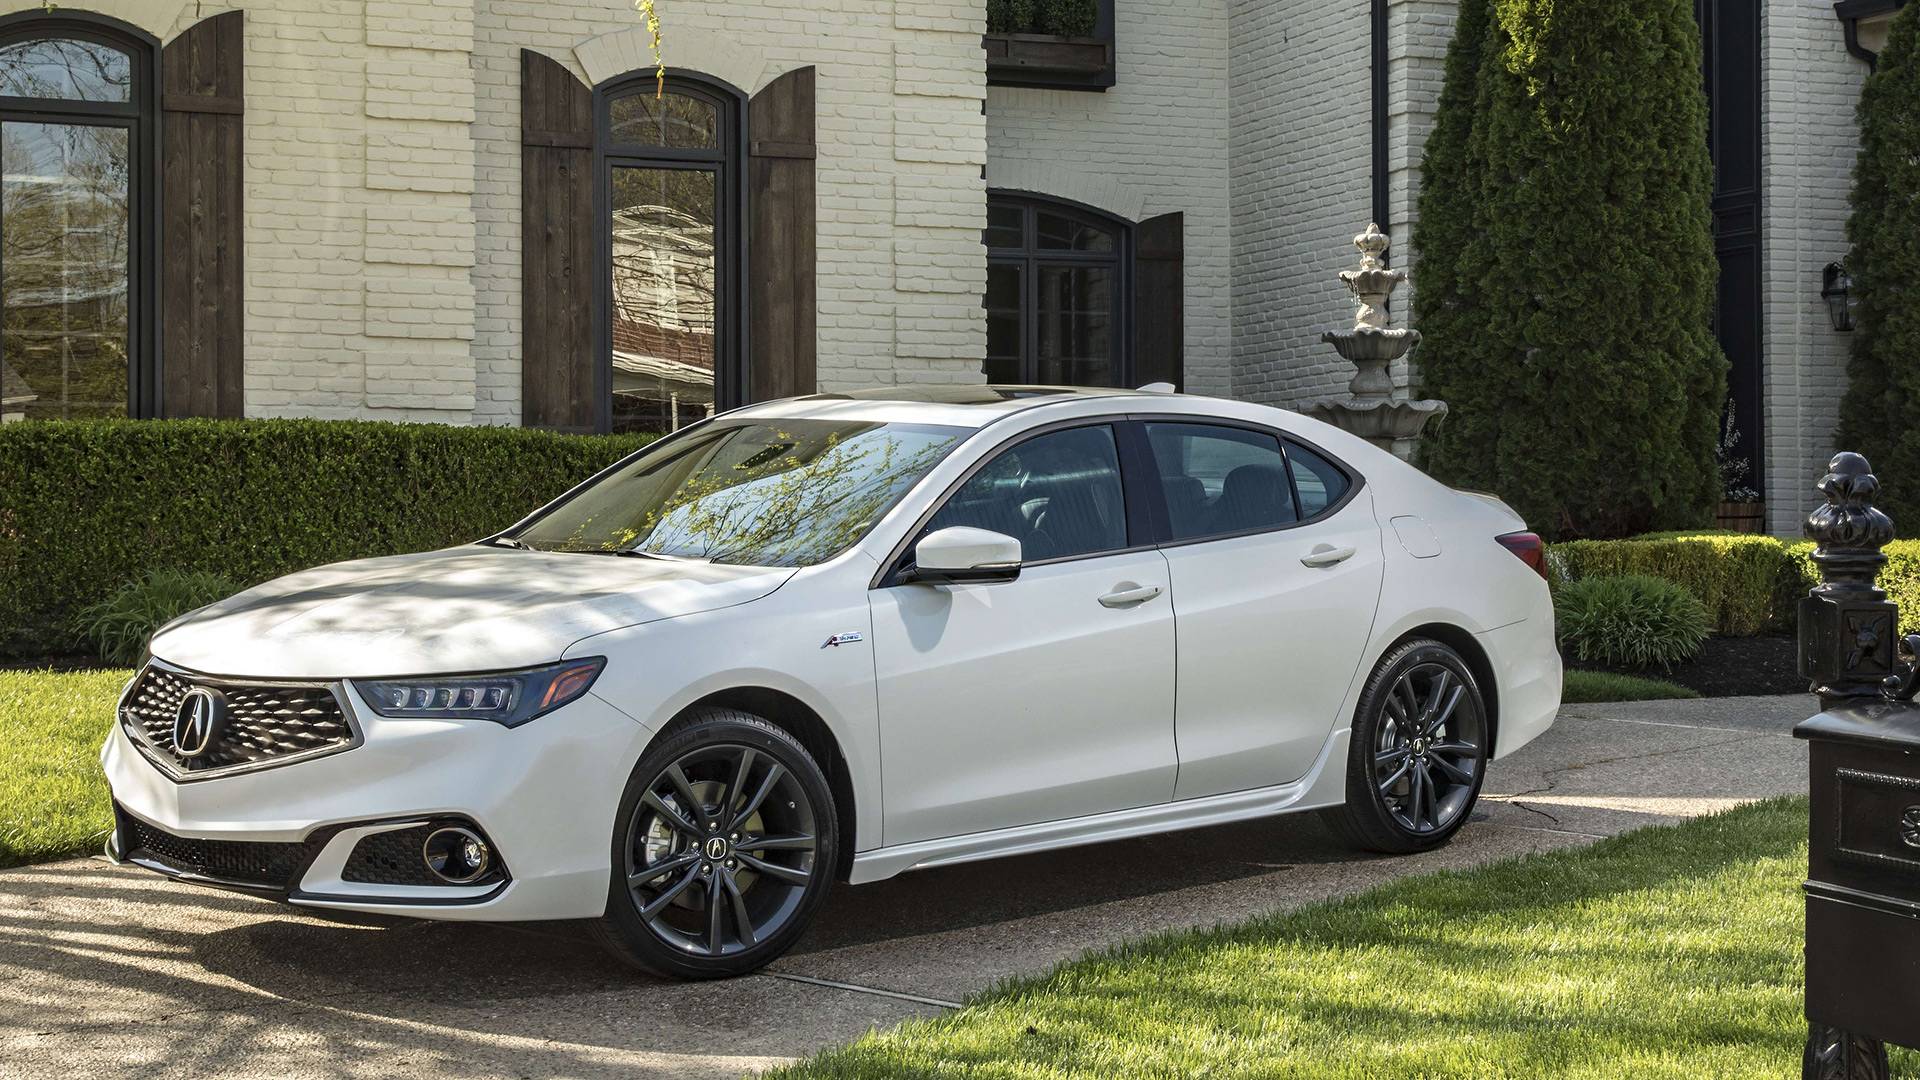 Acura TLX News and Reviews